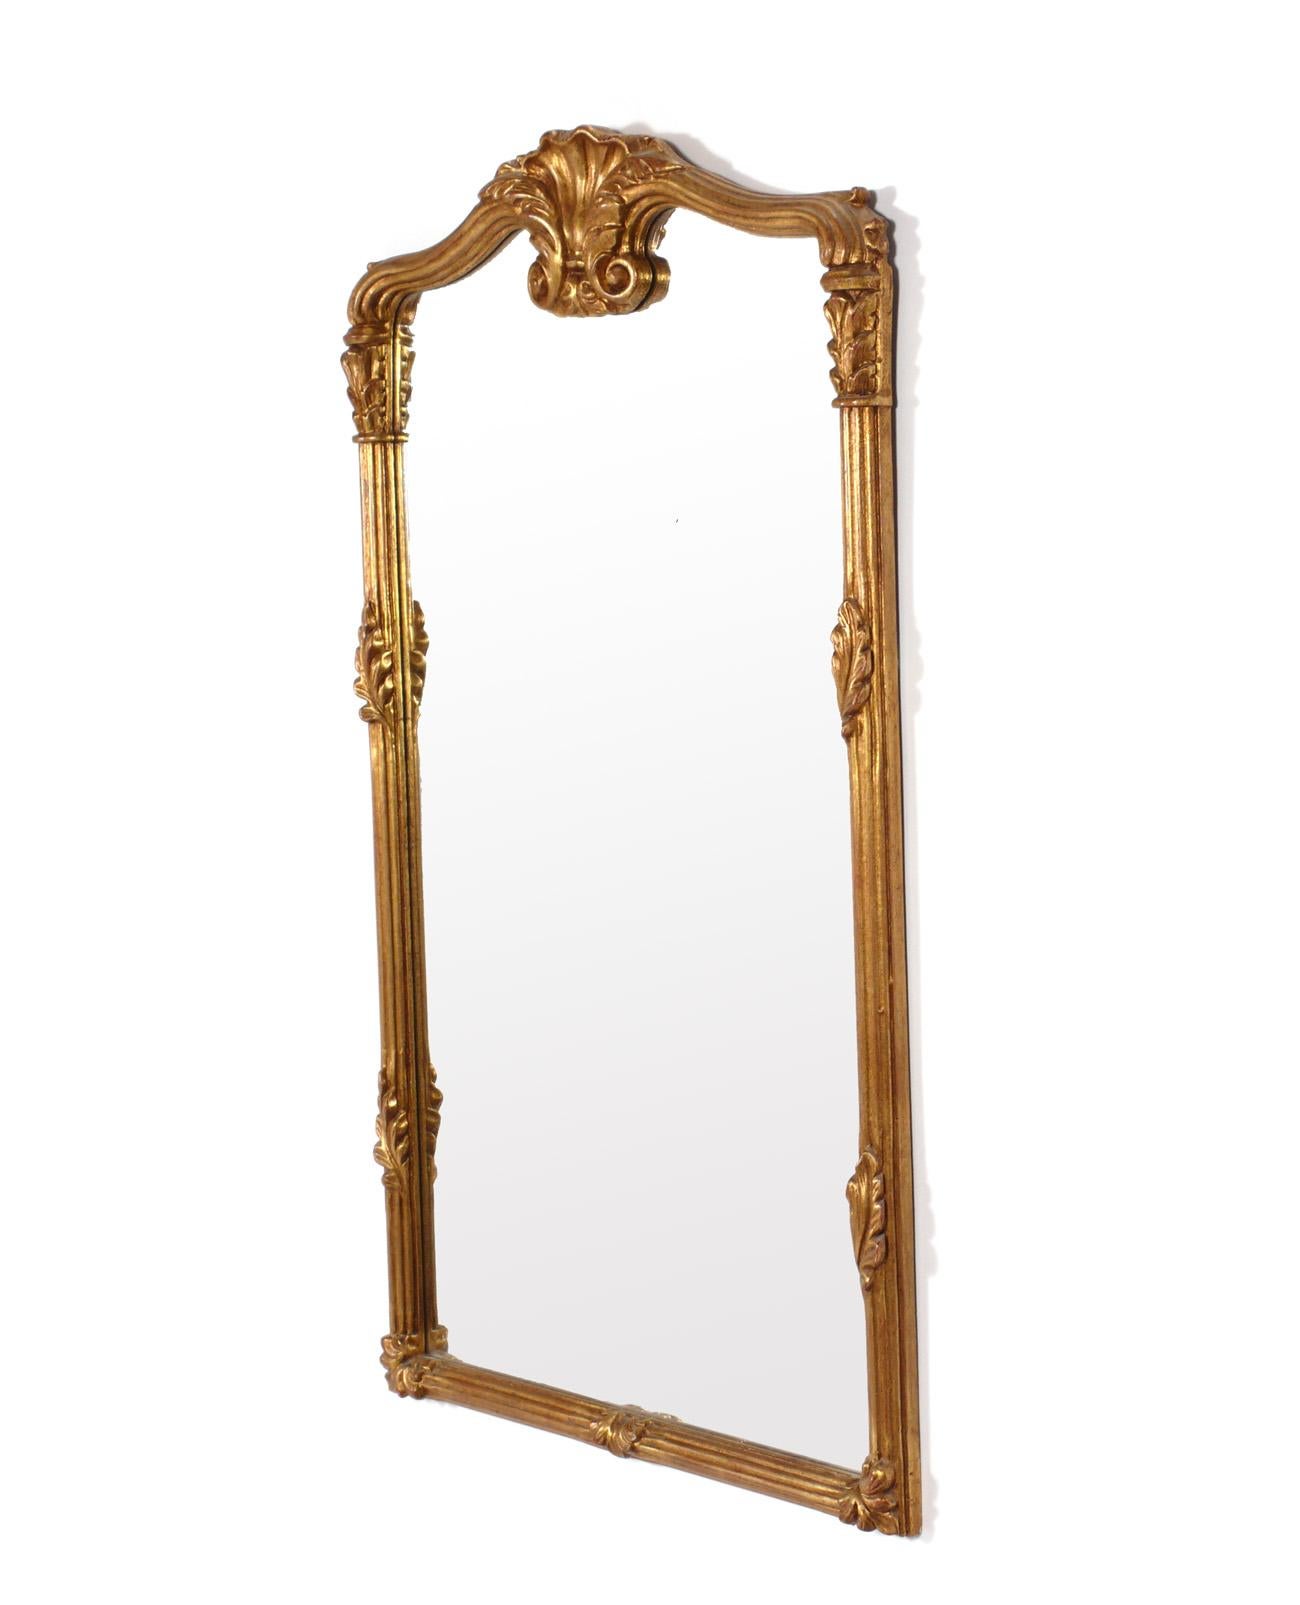 Pair of Gilt Shell Top Mirrors, Italian, circa 1950s. They were recently removed from the legendary Carlyle Hotel in NYC. They are priced at $1800 each or $3300 for the pair. They measure 47